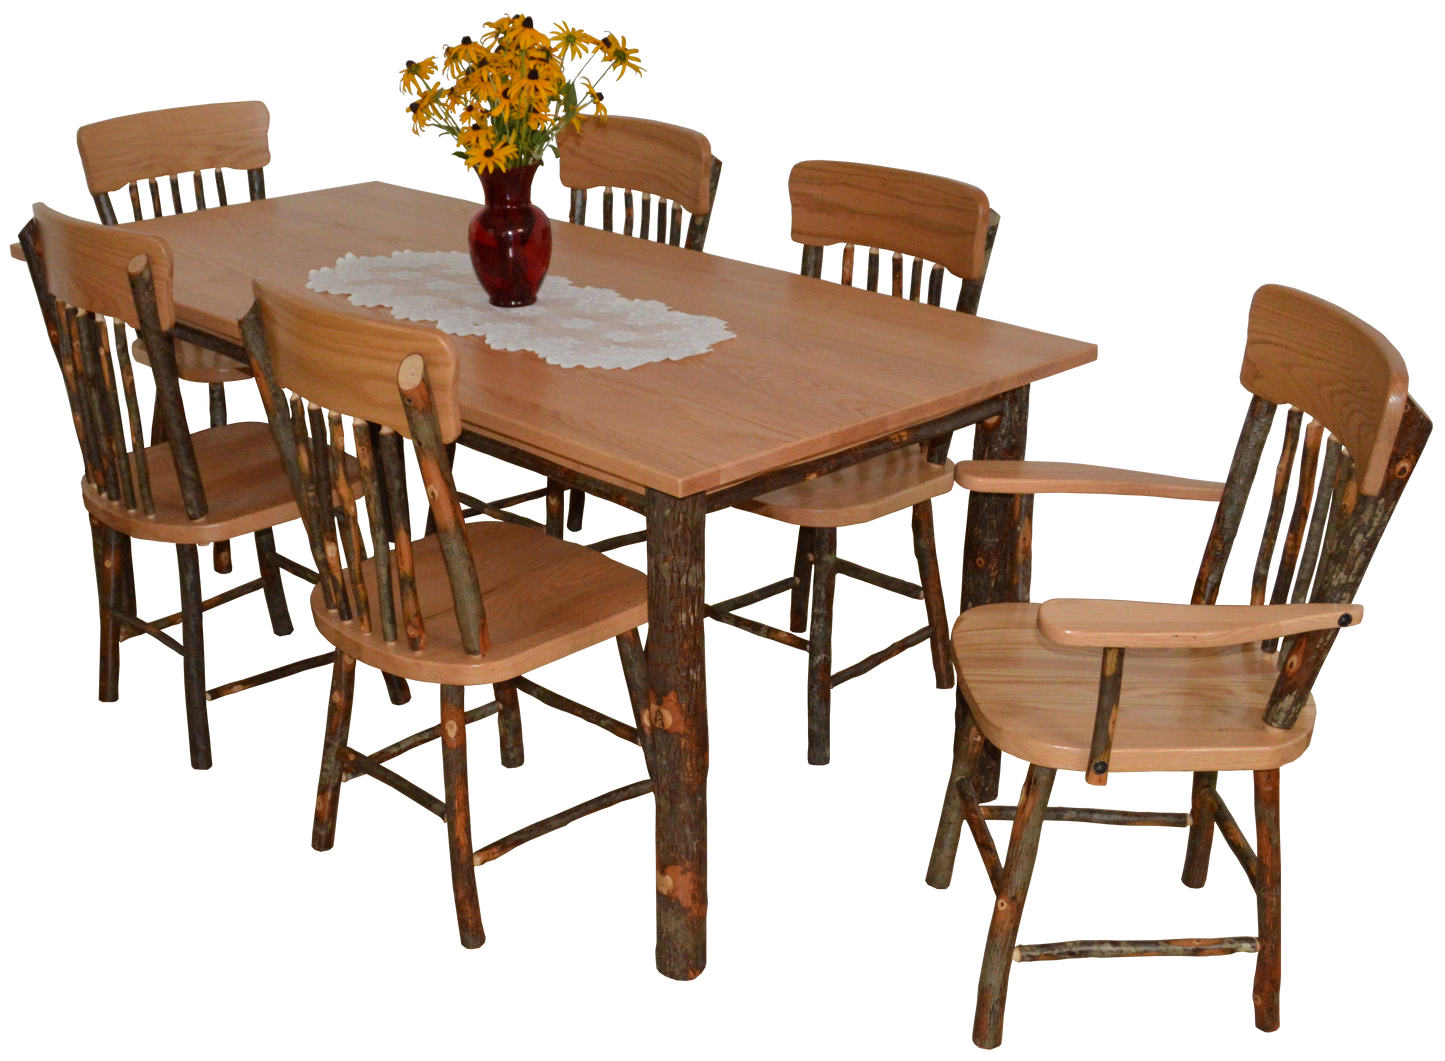 A&L Furniture Co. Hickory 7 Piece Farm Table Dining Set w/ 2 arm Chairs and 4 Dining Chairs - LEAD TIME TO SHIP 10 BUSINESS DAYS